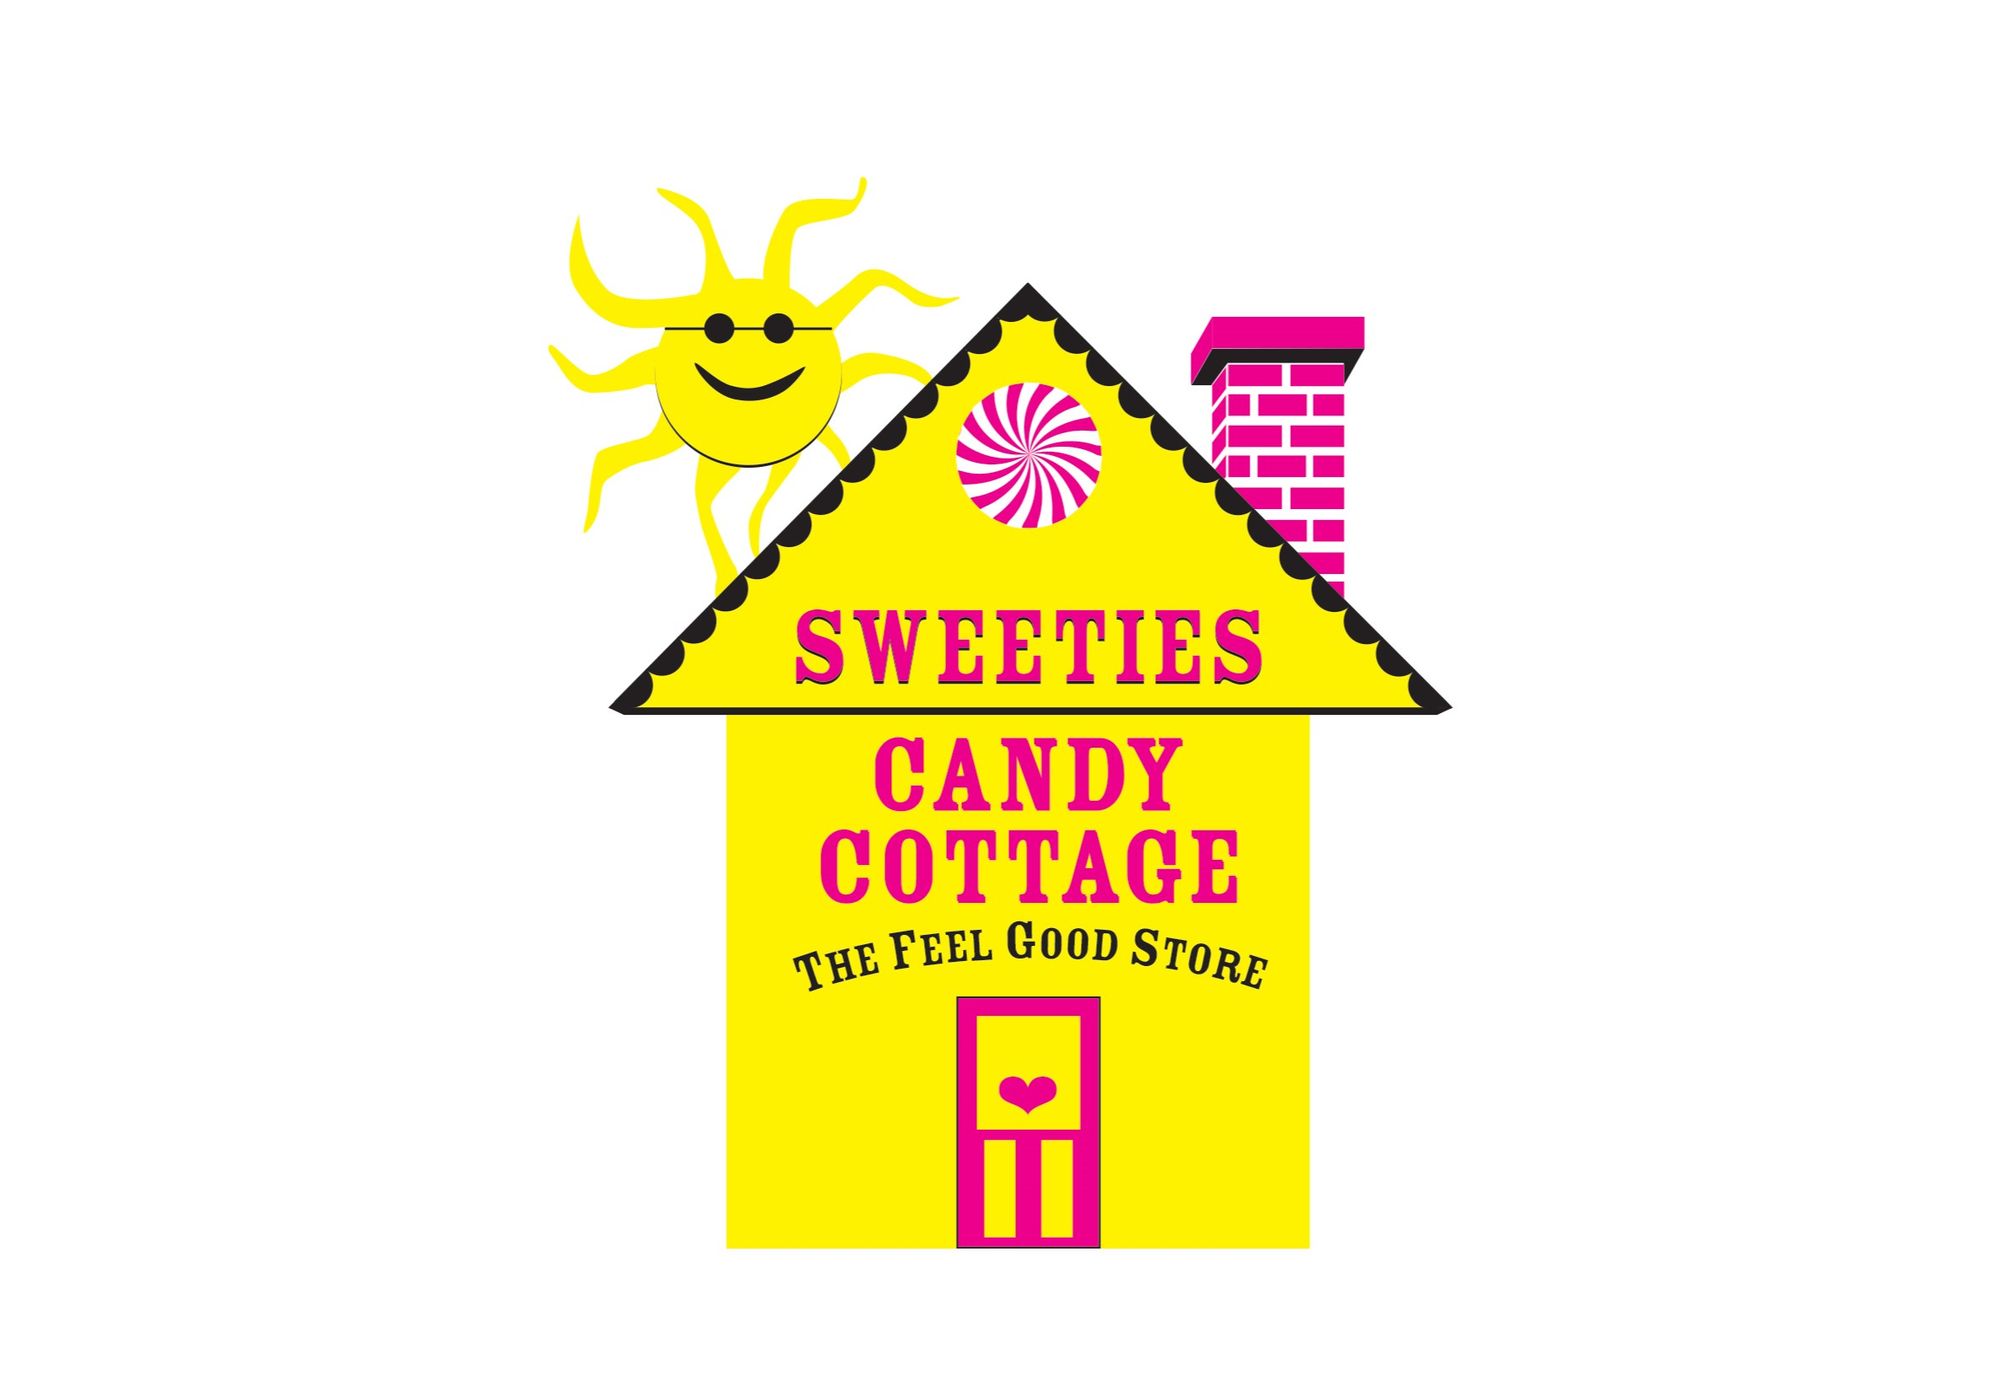 More Than Your Classic Candy Store - Sweeties Candy Cottage